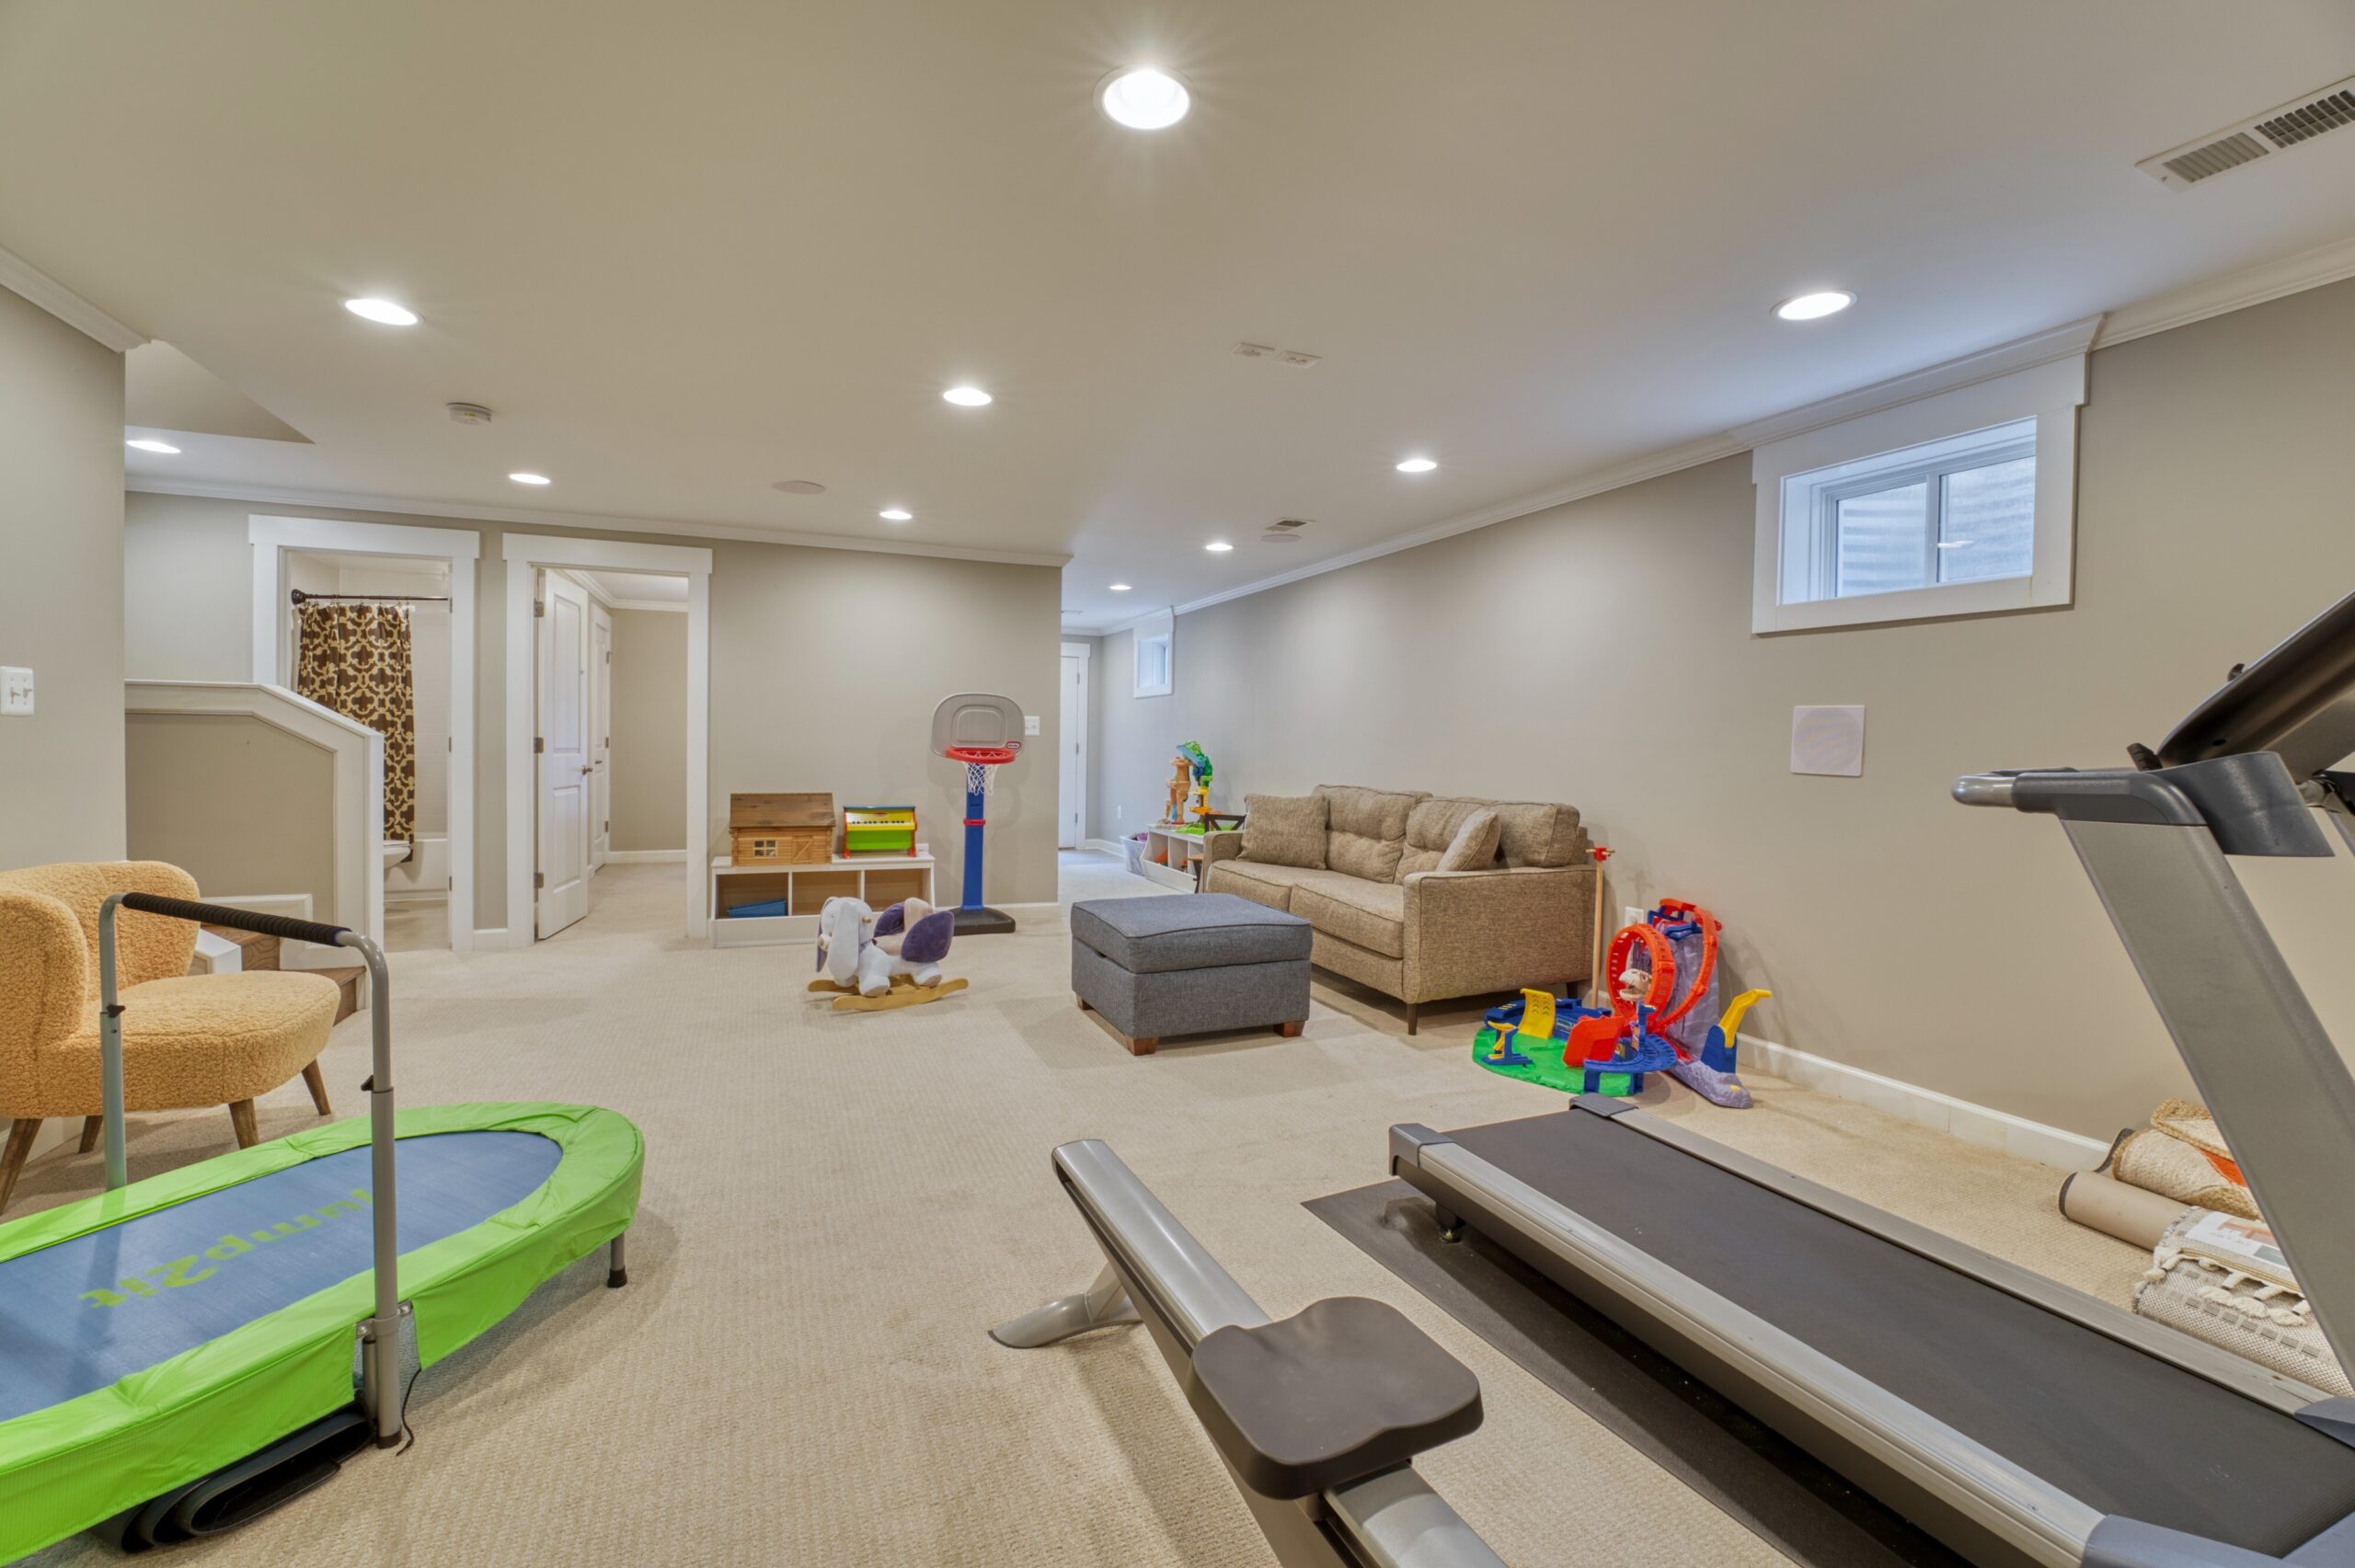 Professional interior photo of 505 N West St - showing the basement with neutral walls and carpeting, high window, and doors to office and full bathroom